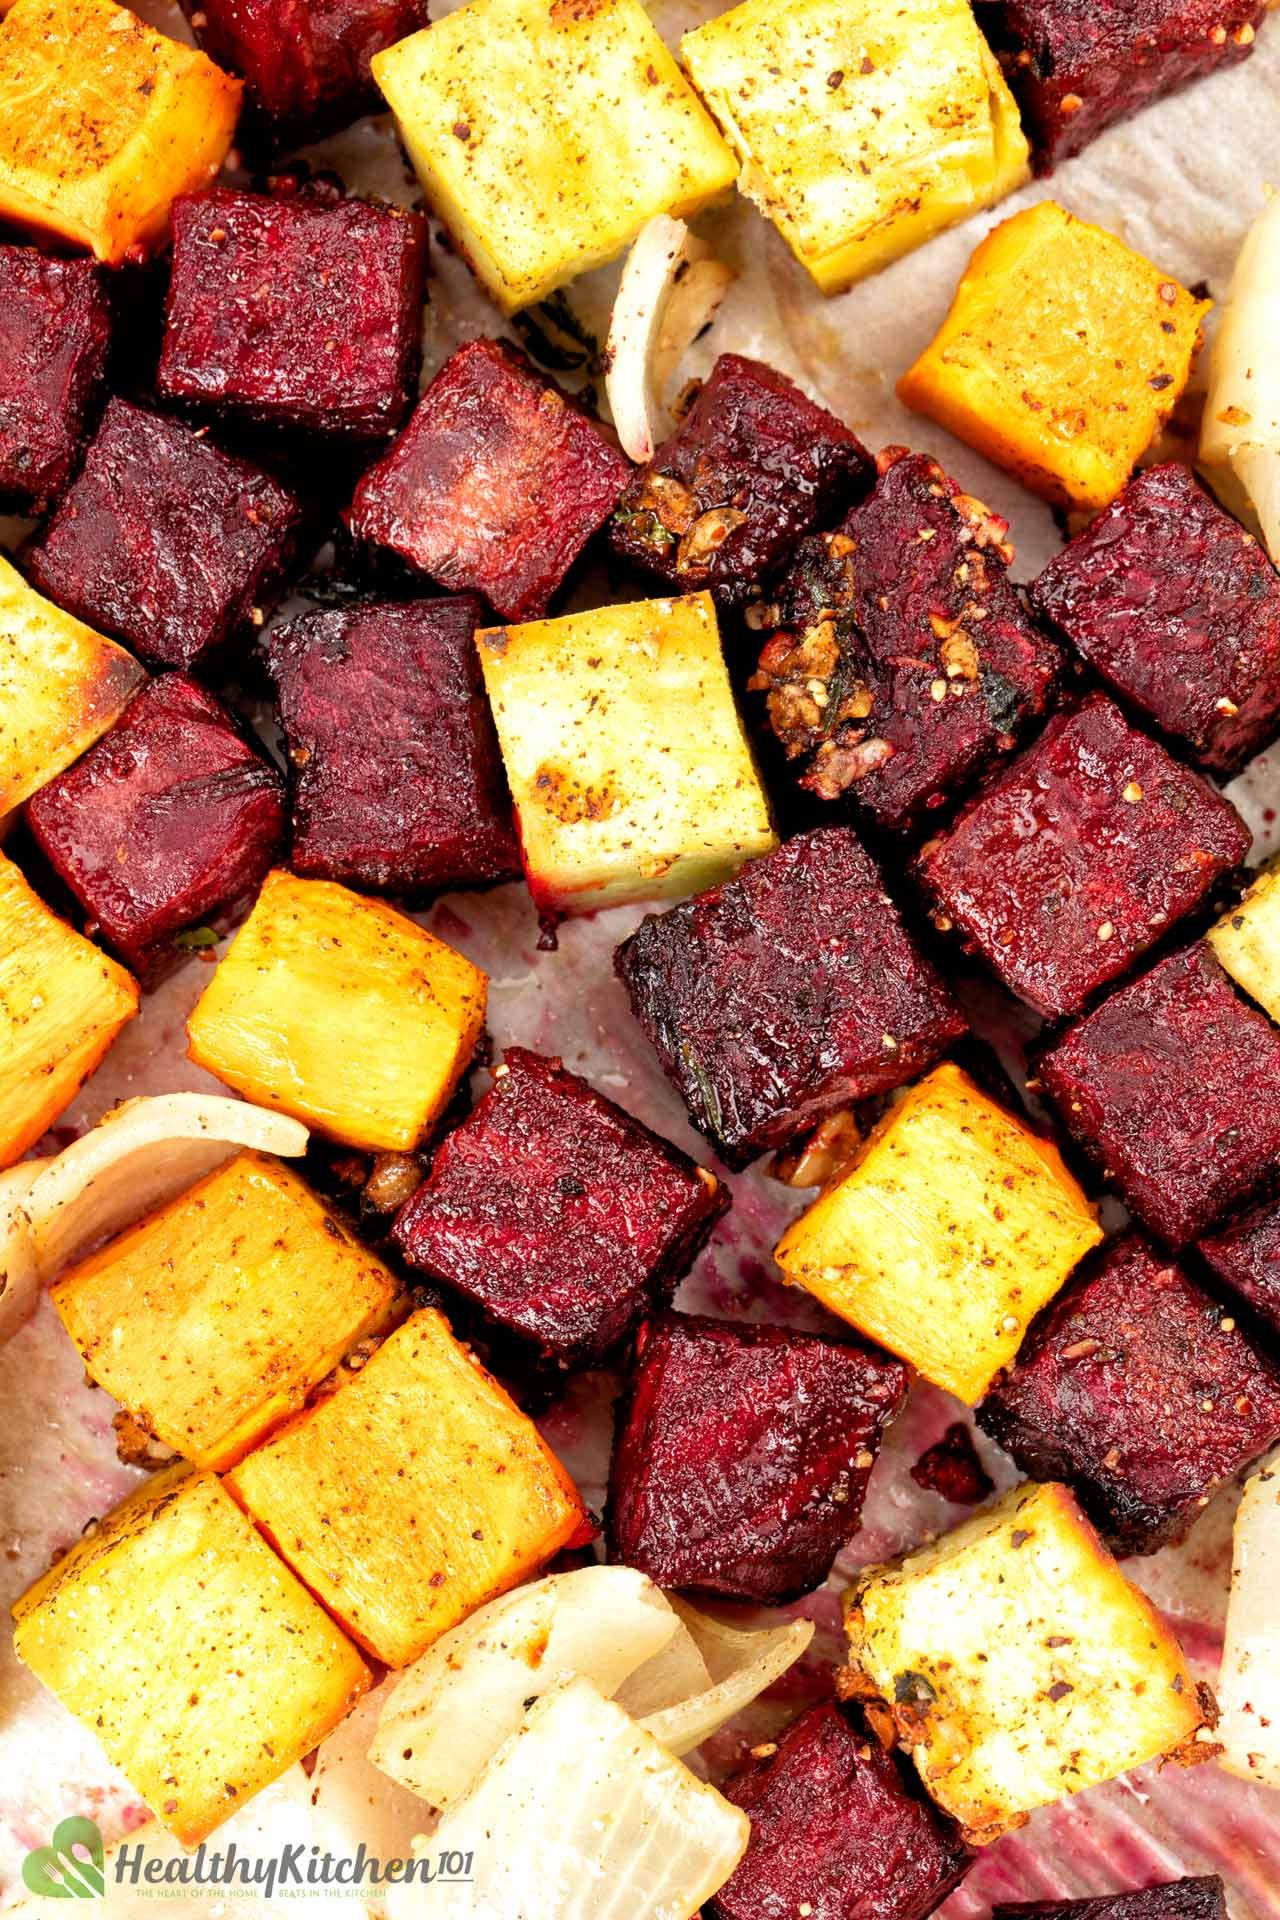 How to store Roasted Beets